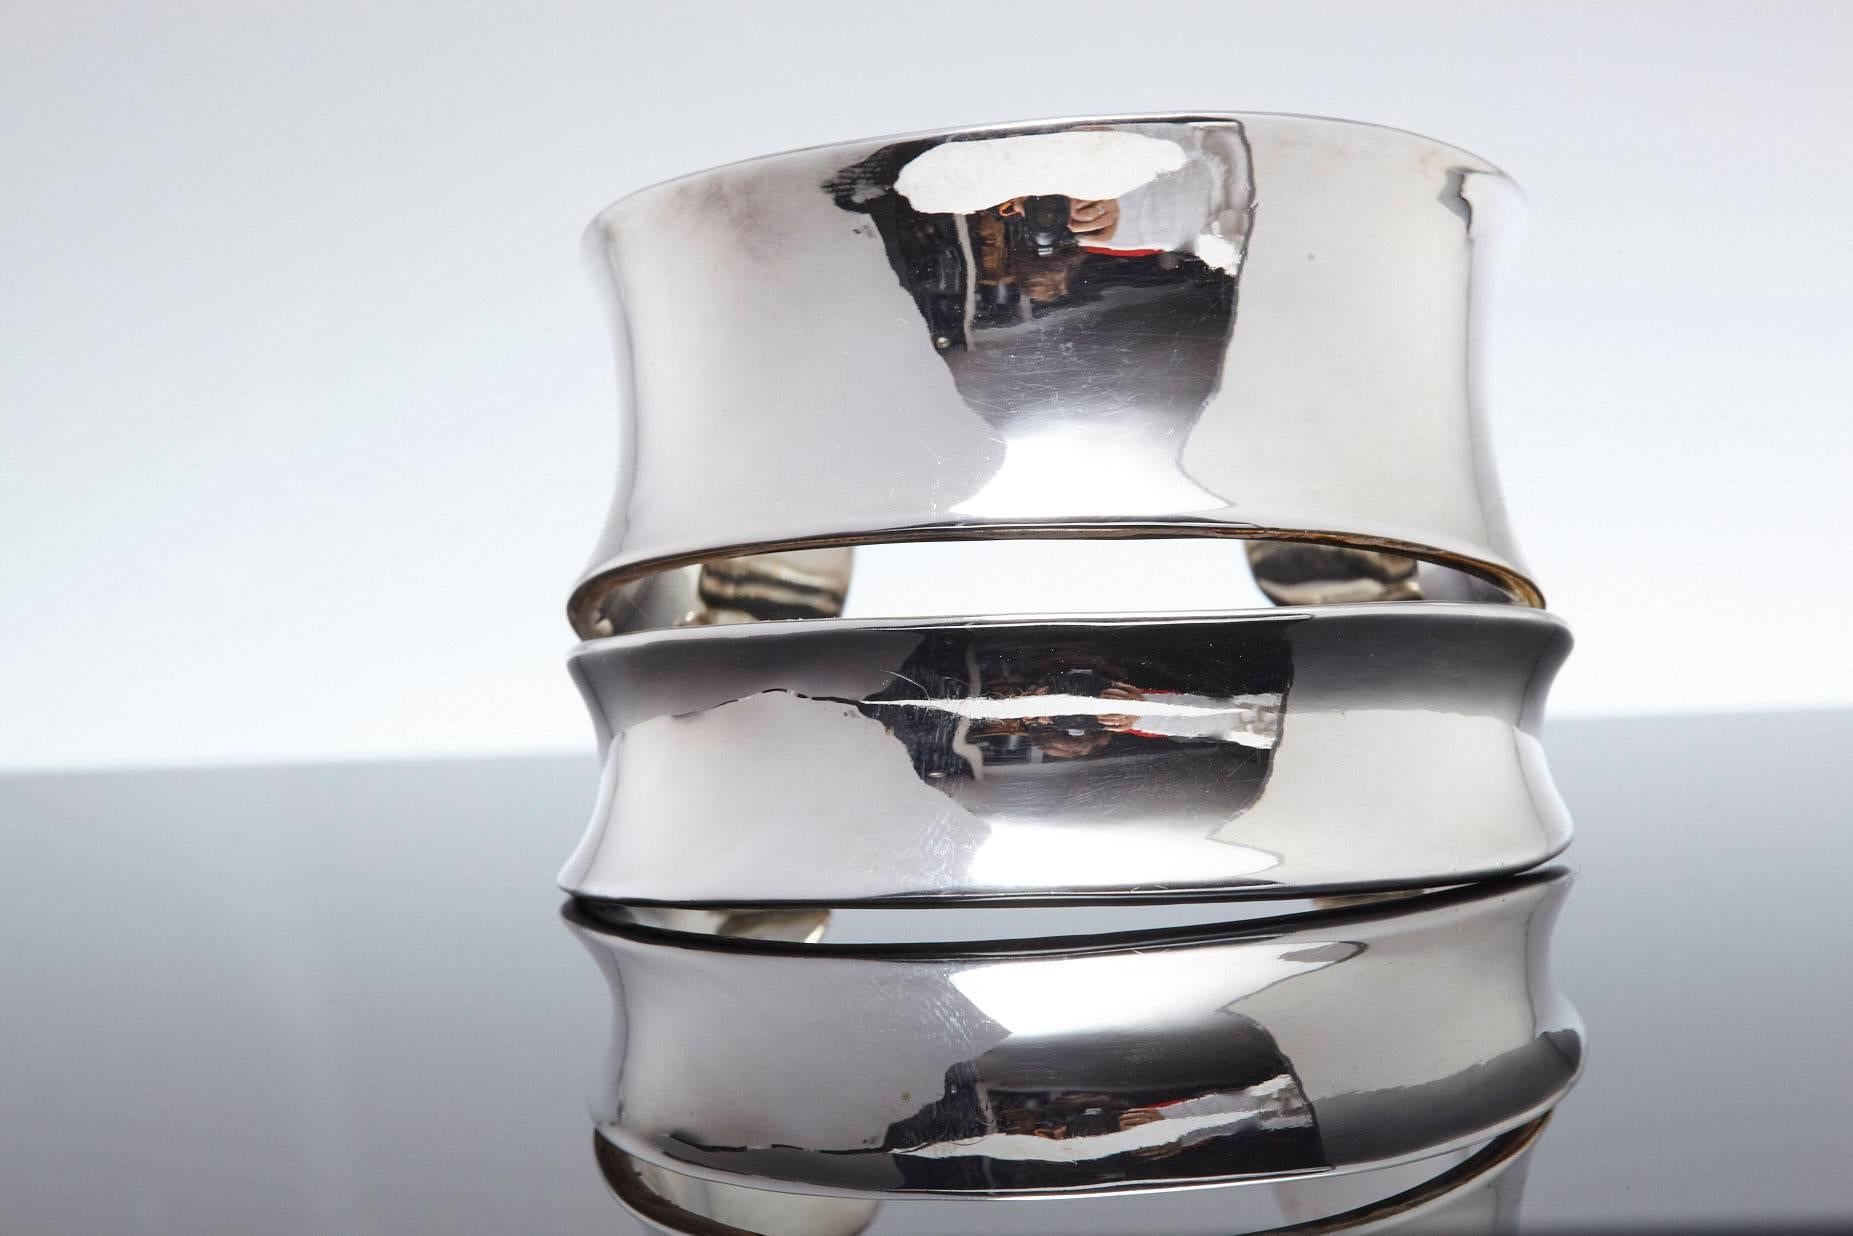 Beautiful Robert Lee Morris sculptural silver plated cuff, circa 1990s.
Excellent condition, engraved on the inside 'Robert Lee Morris'.
Inside length 2.25 inch, opening 1 inch
